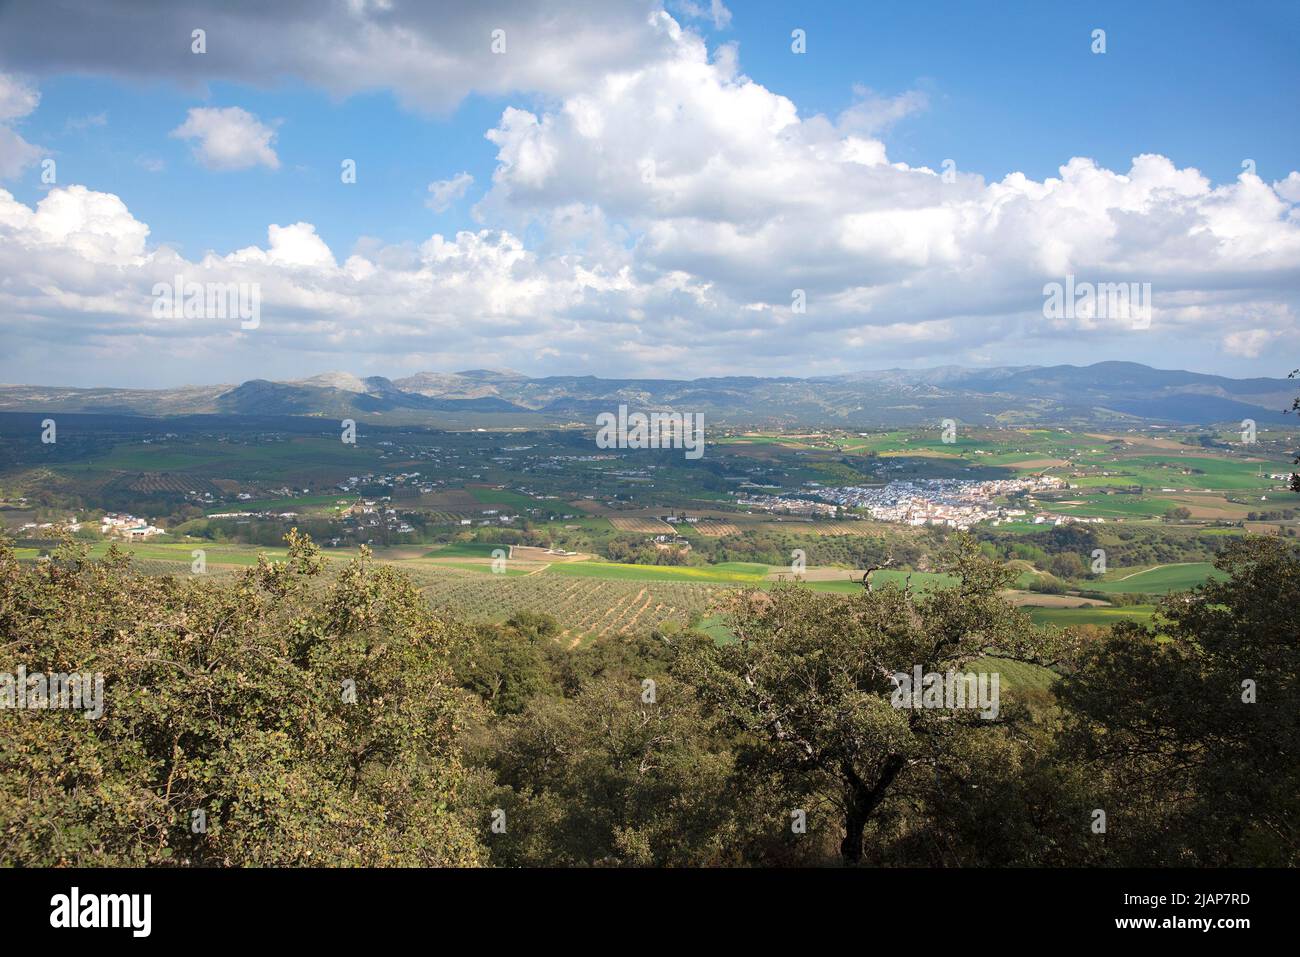 View over the small town of Arriate, in Andalusia Spain Stock Photo